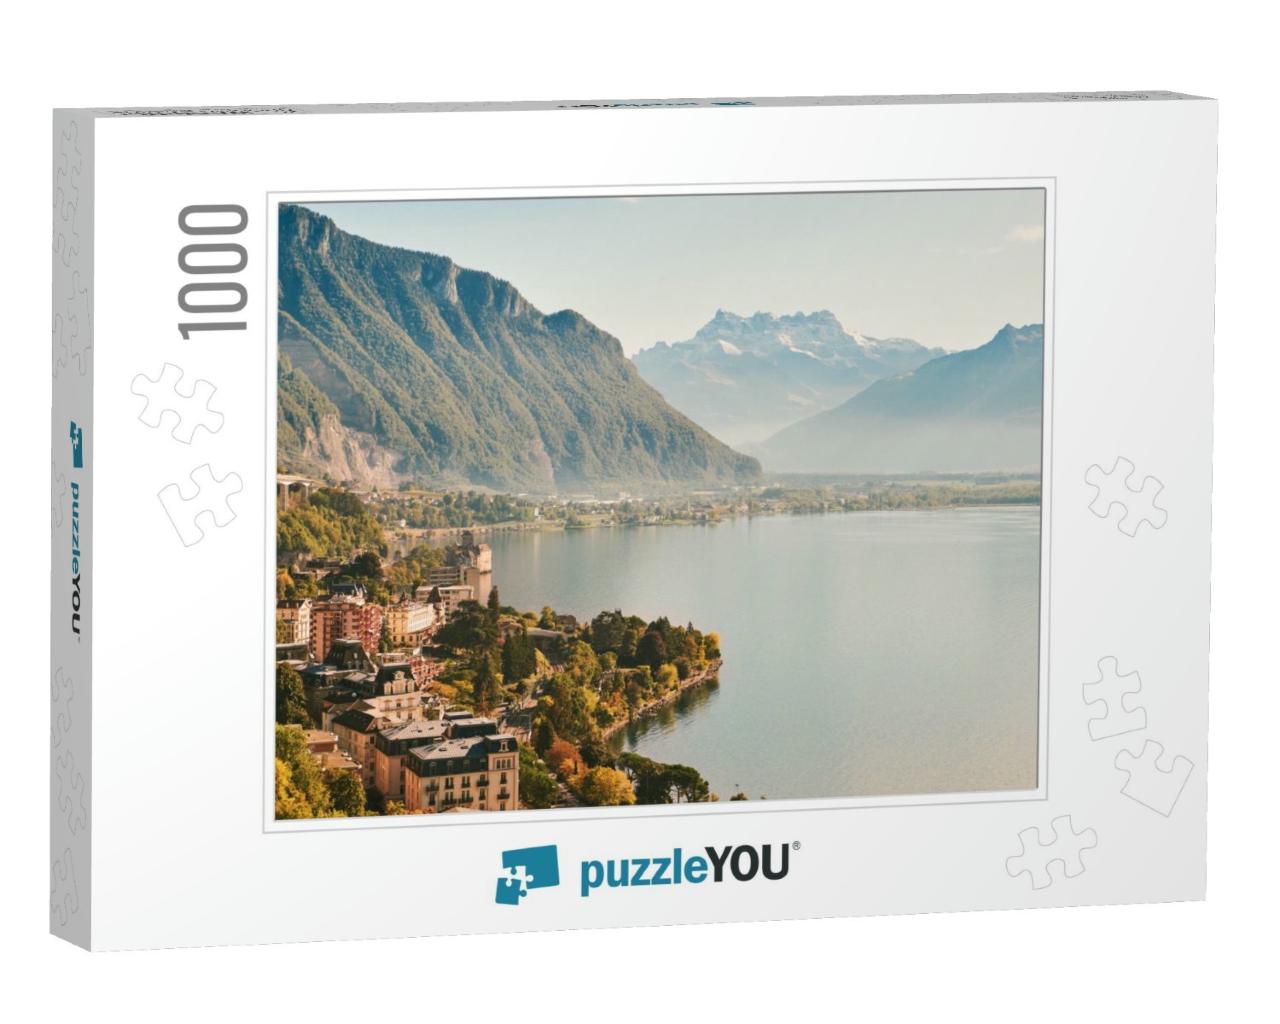 Summer Landscape of Montreux City, Switzerland, Canton of... Jigsaw Puzzle with 1000 pieces